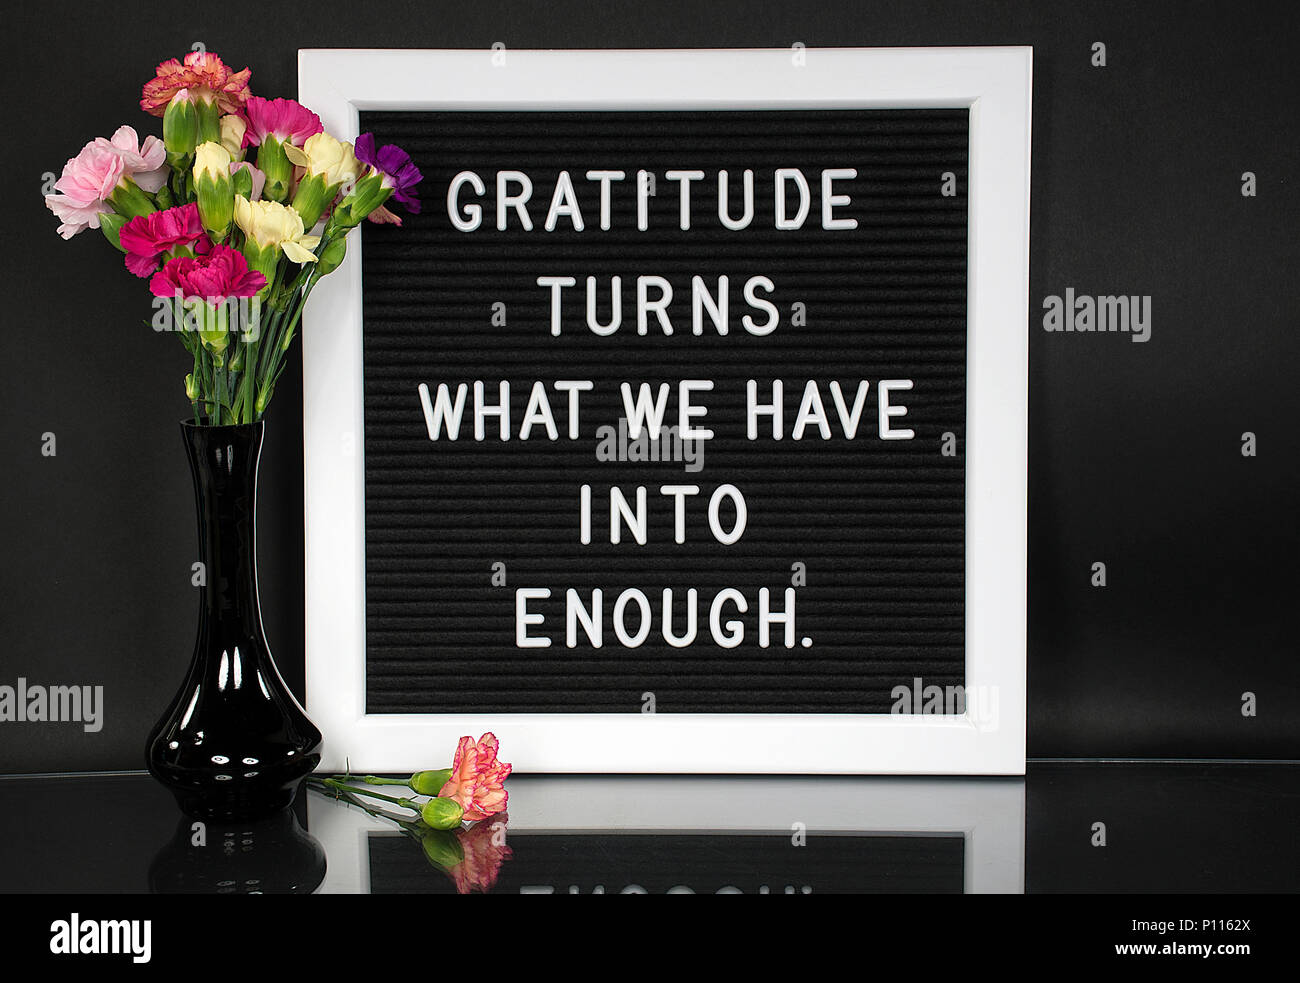 inspiration quote about gratitude on message board with carnation bouquet in black vase Stock Photo